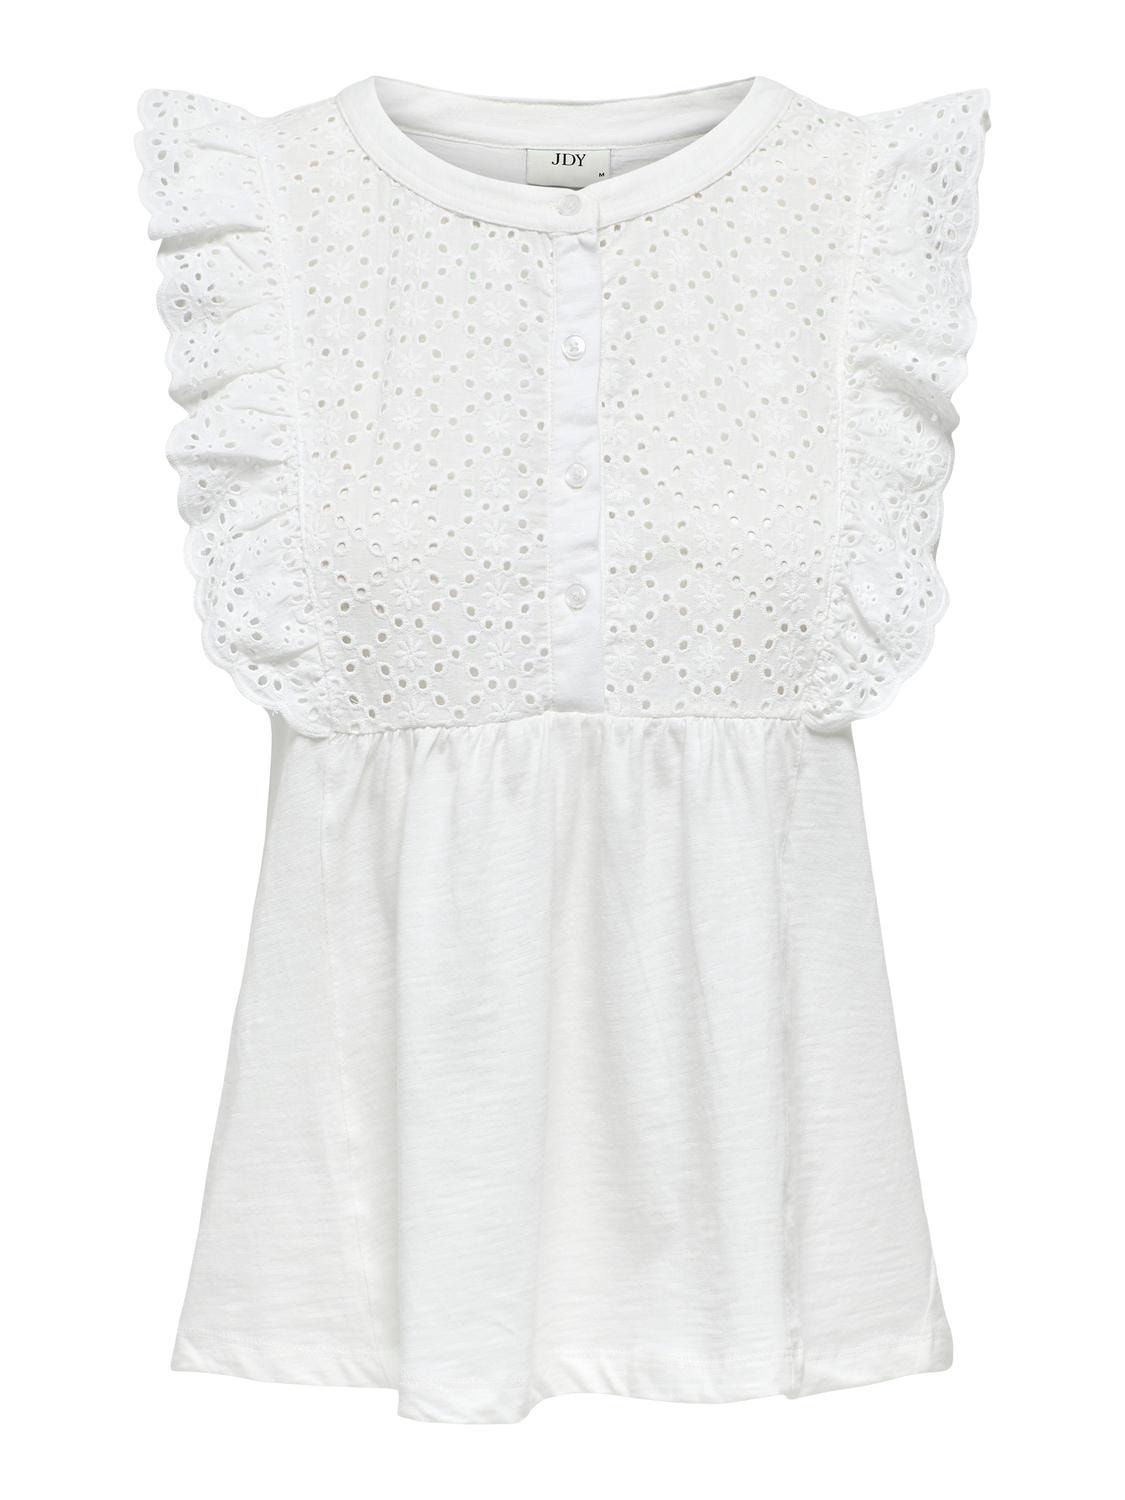 ONLY Top with lace detail -Snow White - 15333667